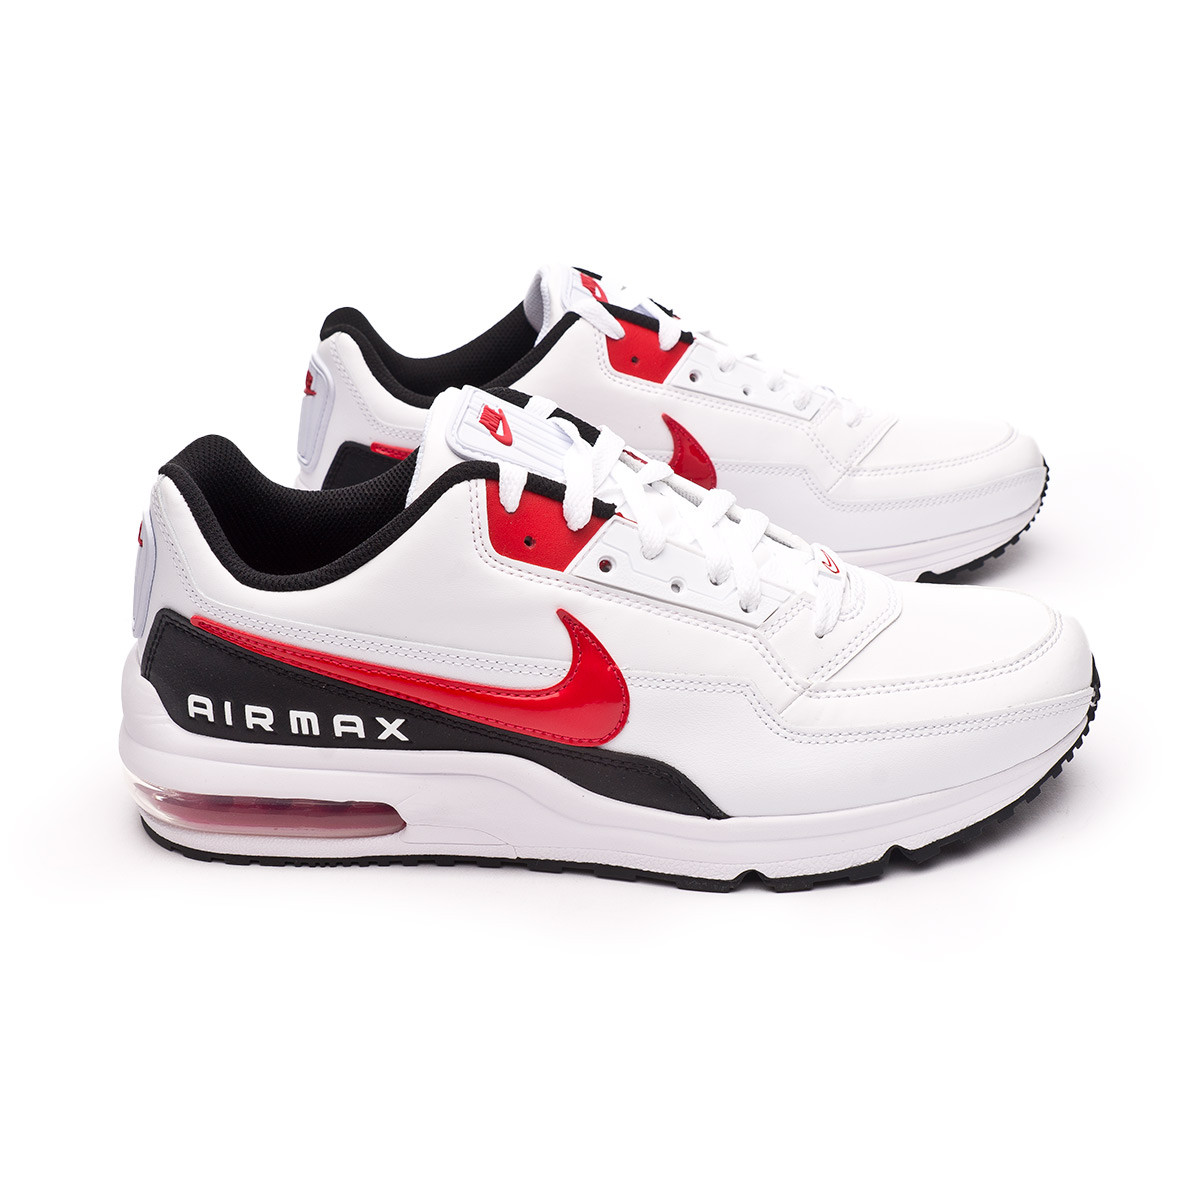 air max ltd 3 white and red